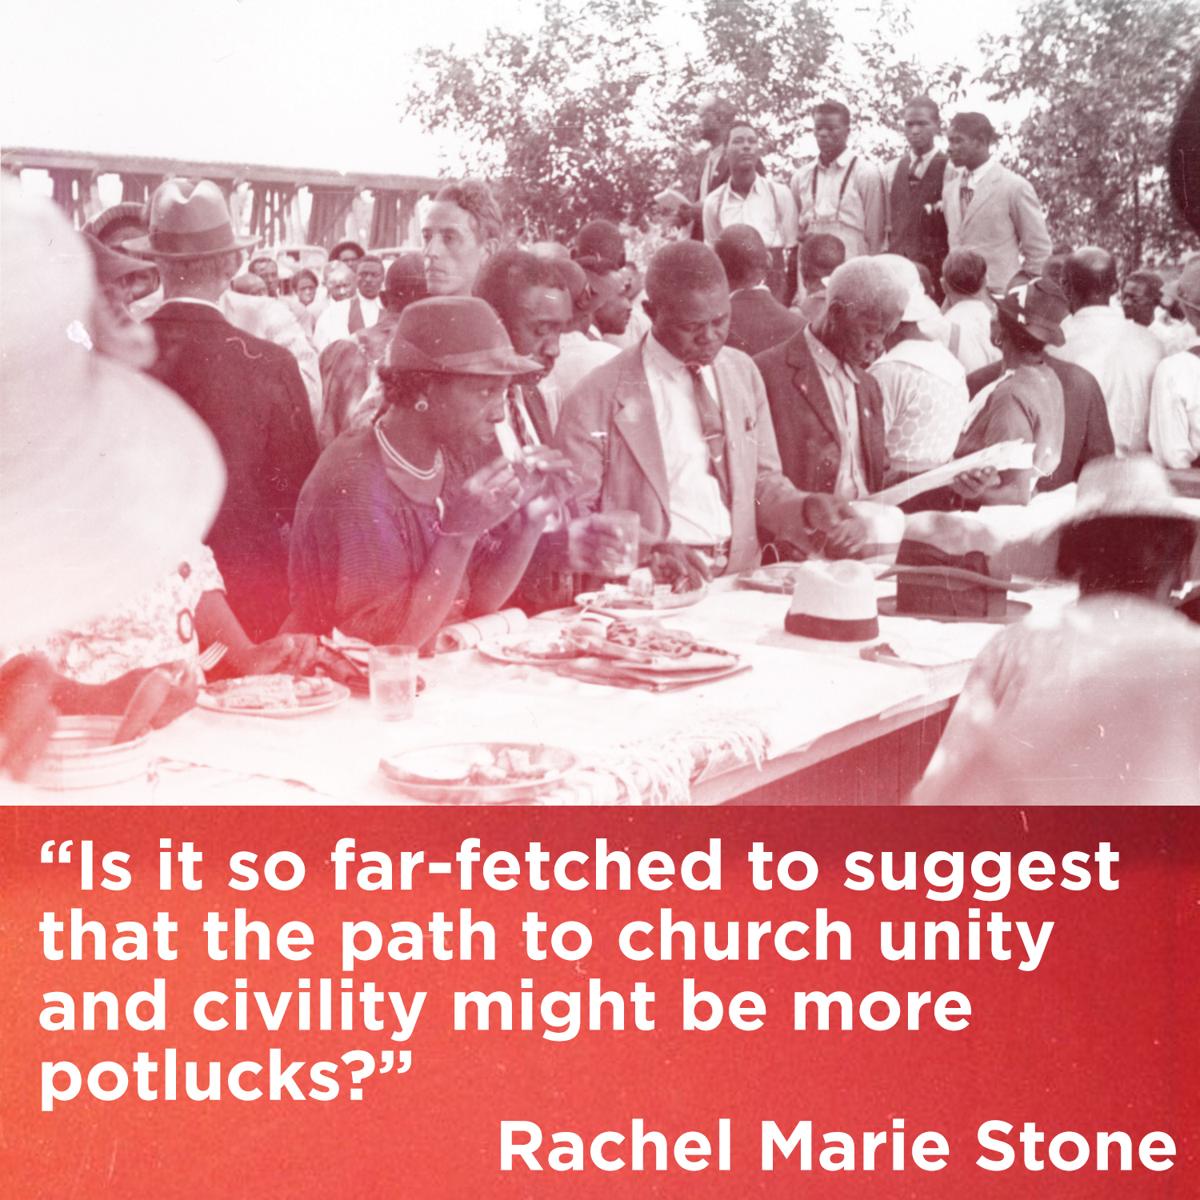 Quote: Is it so far-fetched to suggest that the path to church unity and civility might be more potlucks? Rachel Marie Stone